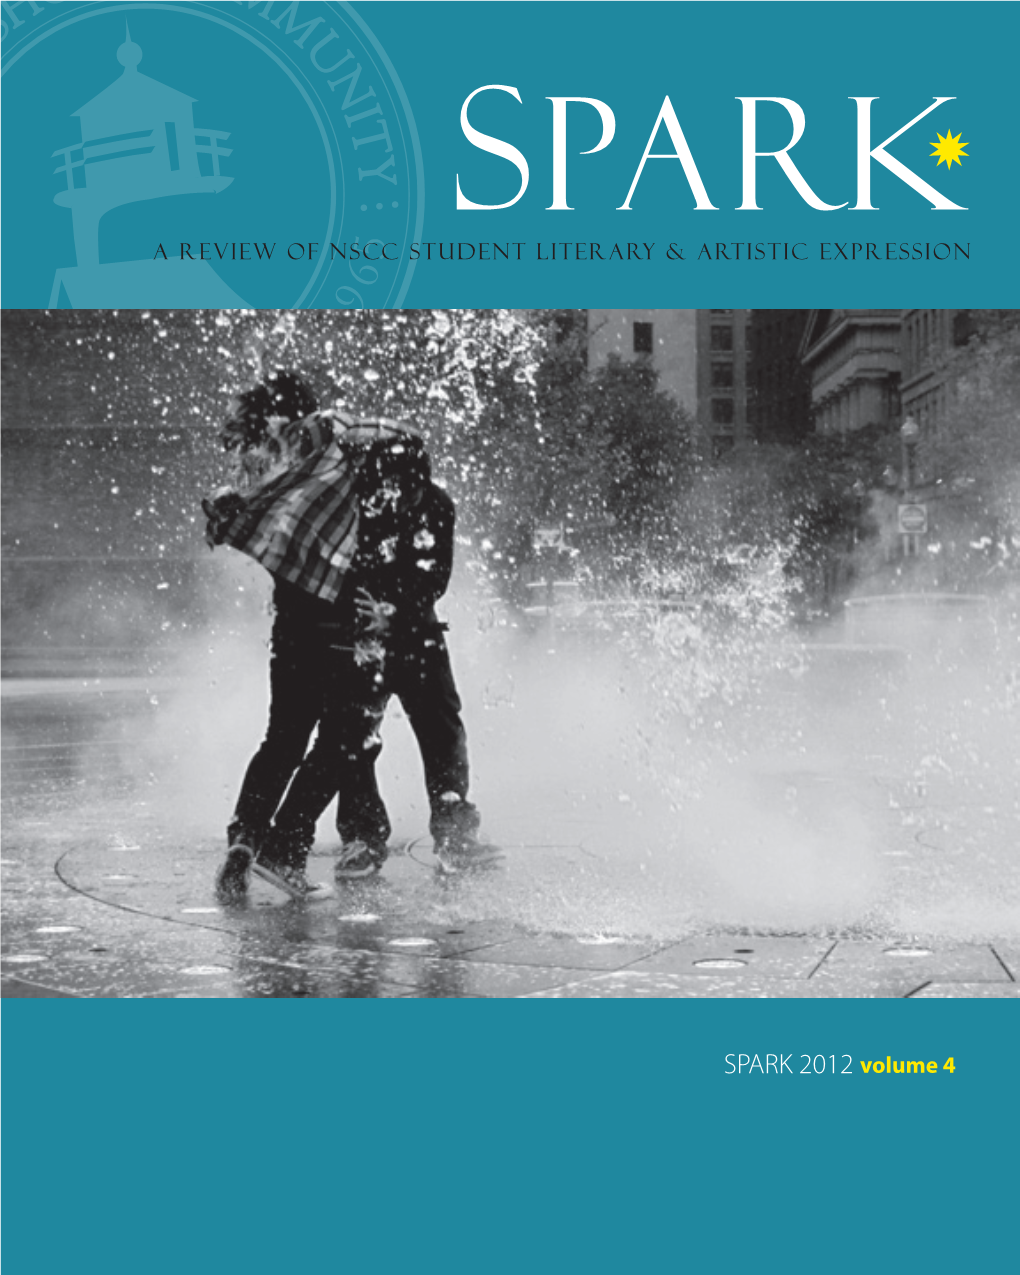 SPARK 2012 Volume 4 Eclectic Sparked by Inspiration